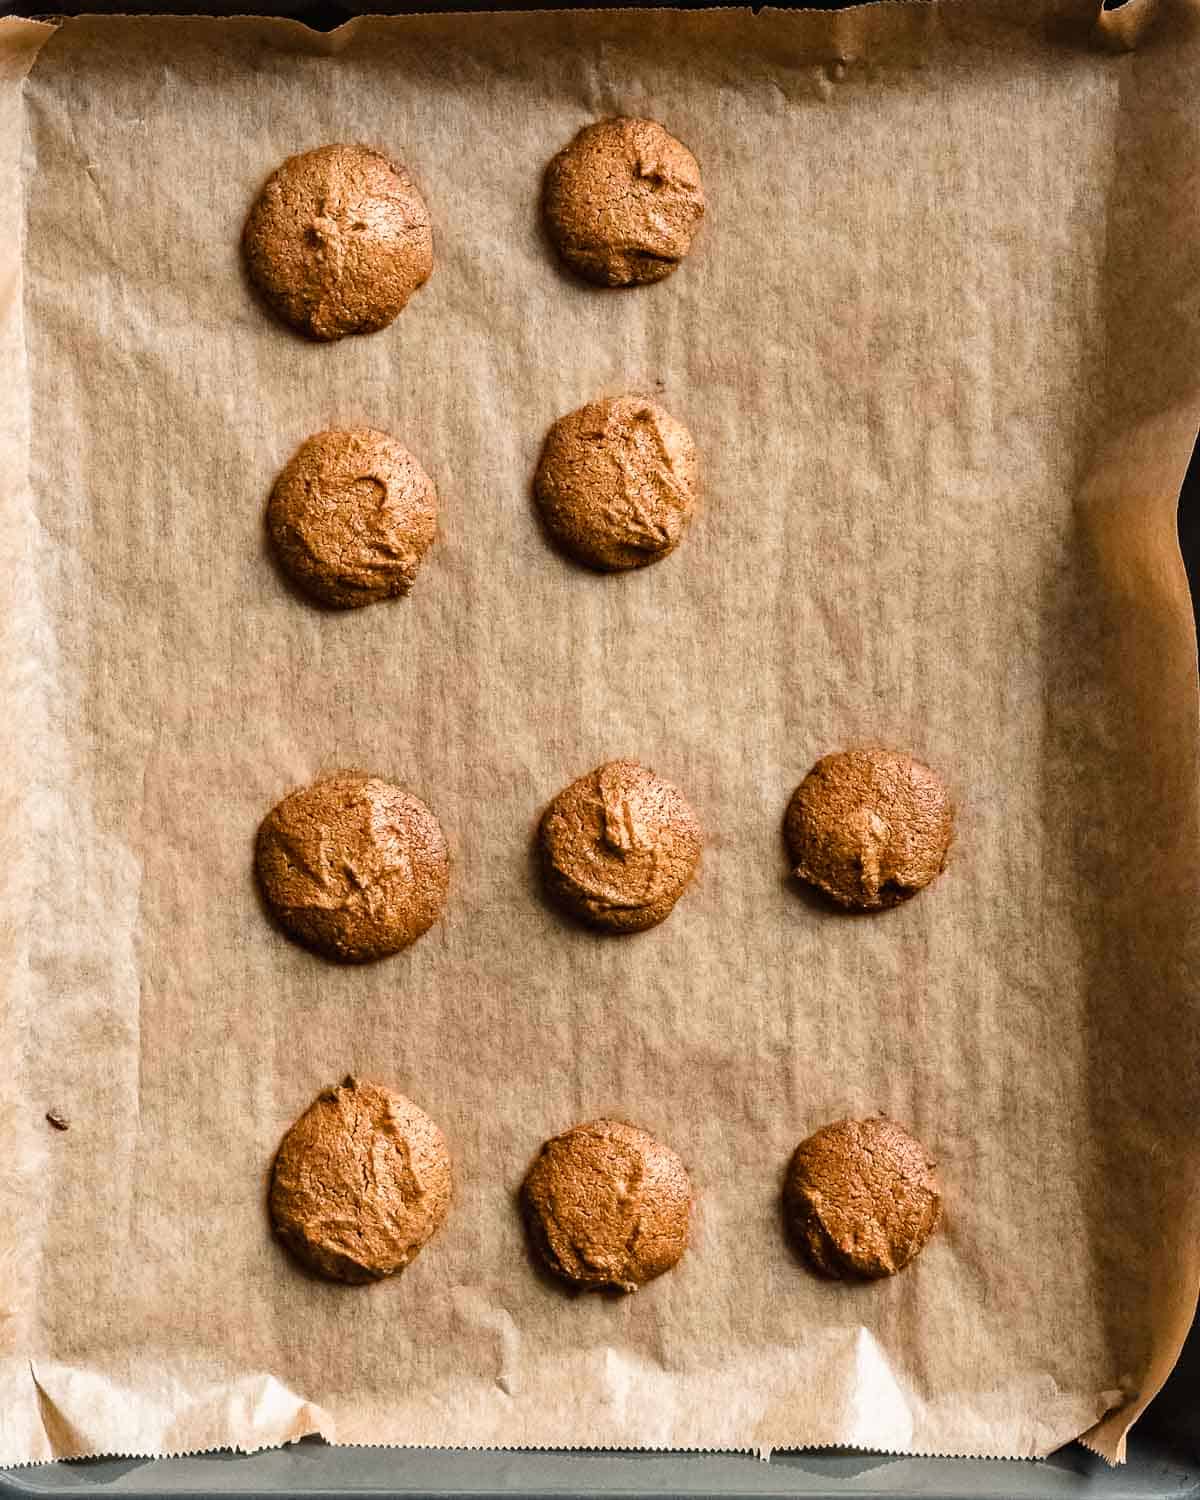 10 baked peanut butter cookies on a baking tray with parchment paper.